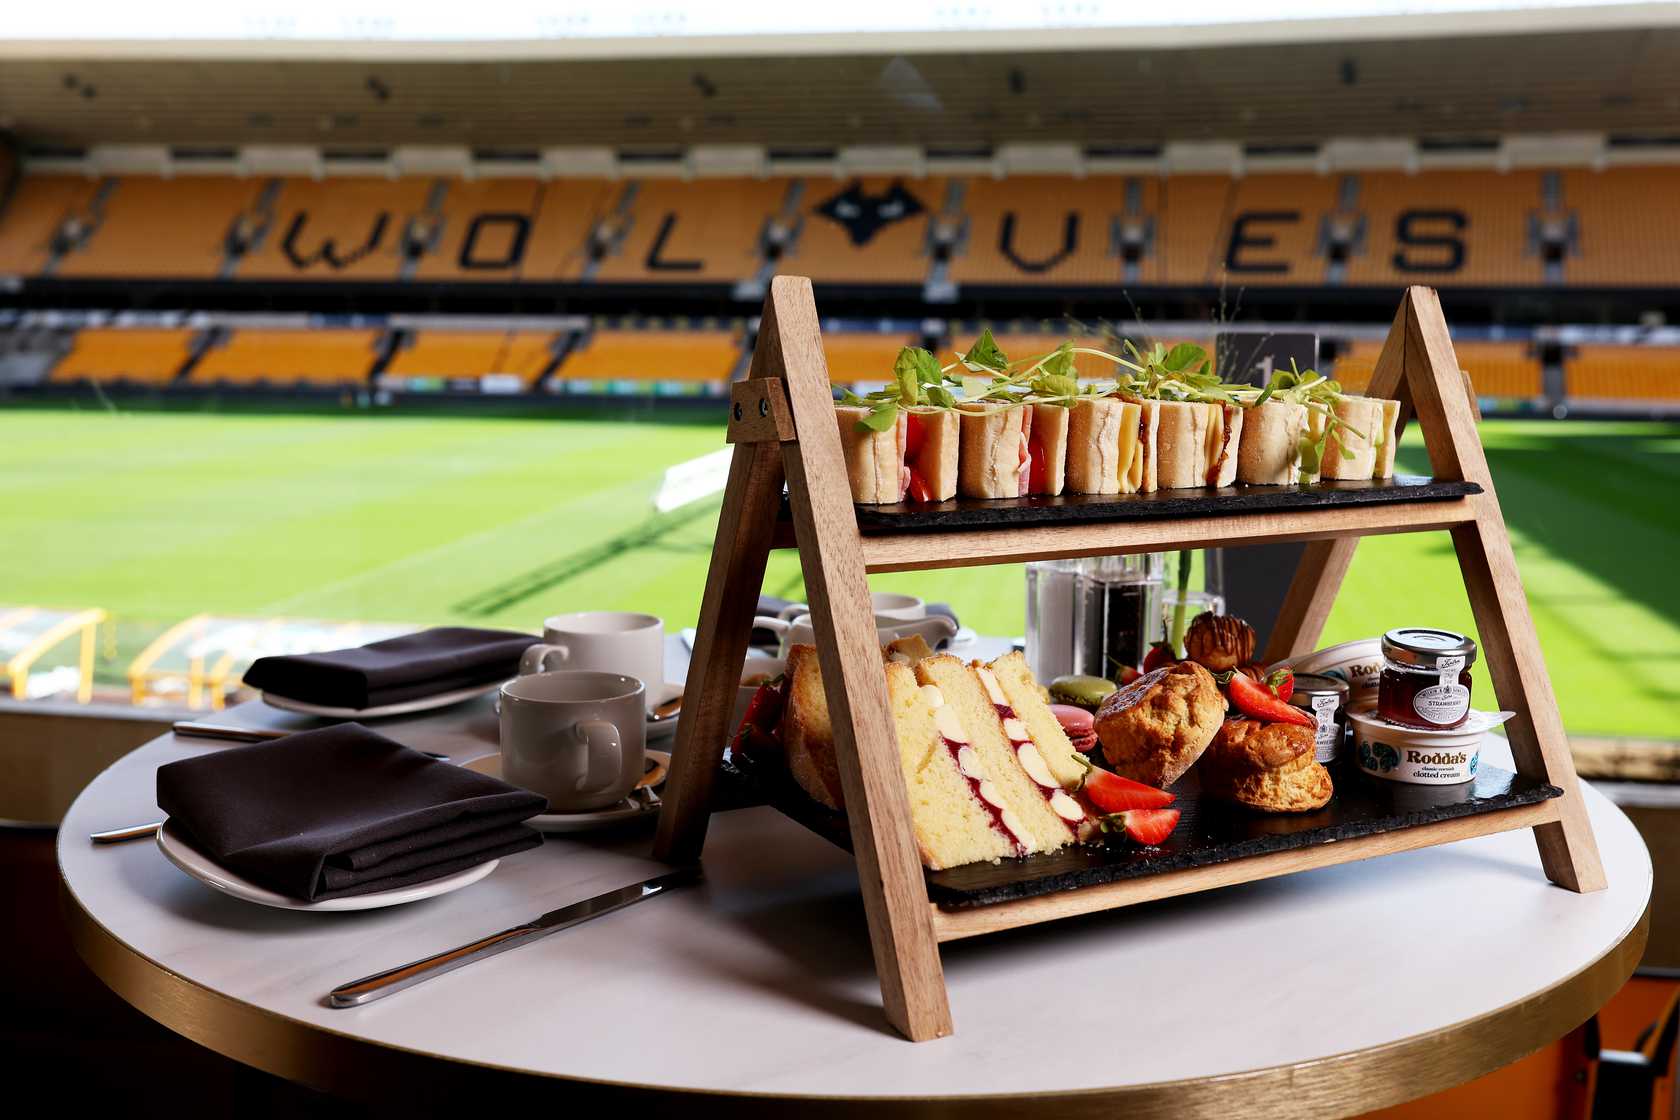 Afternoon tea food platter including sandwiches, cakes and scones for an afternoon tea and tour of Molineux Stadium